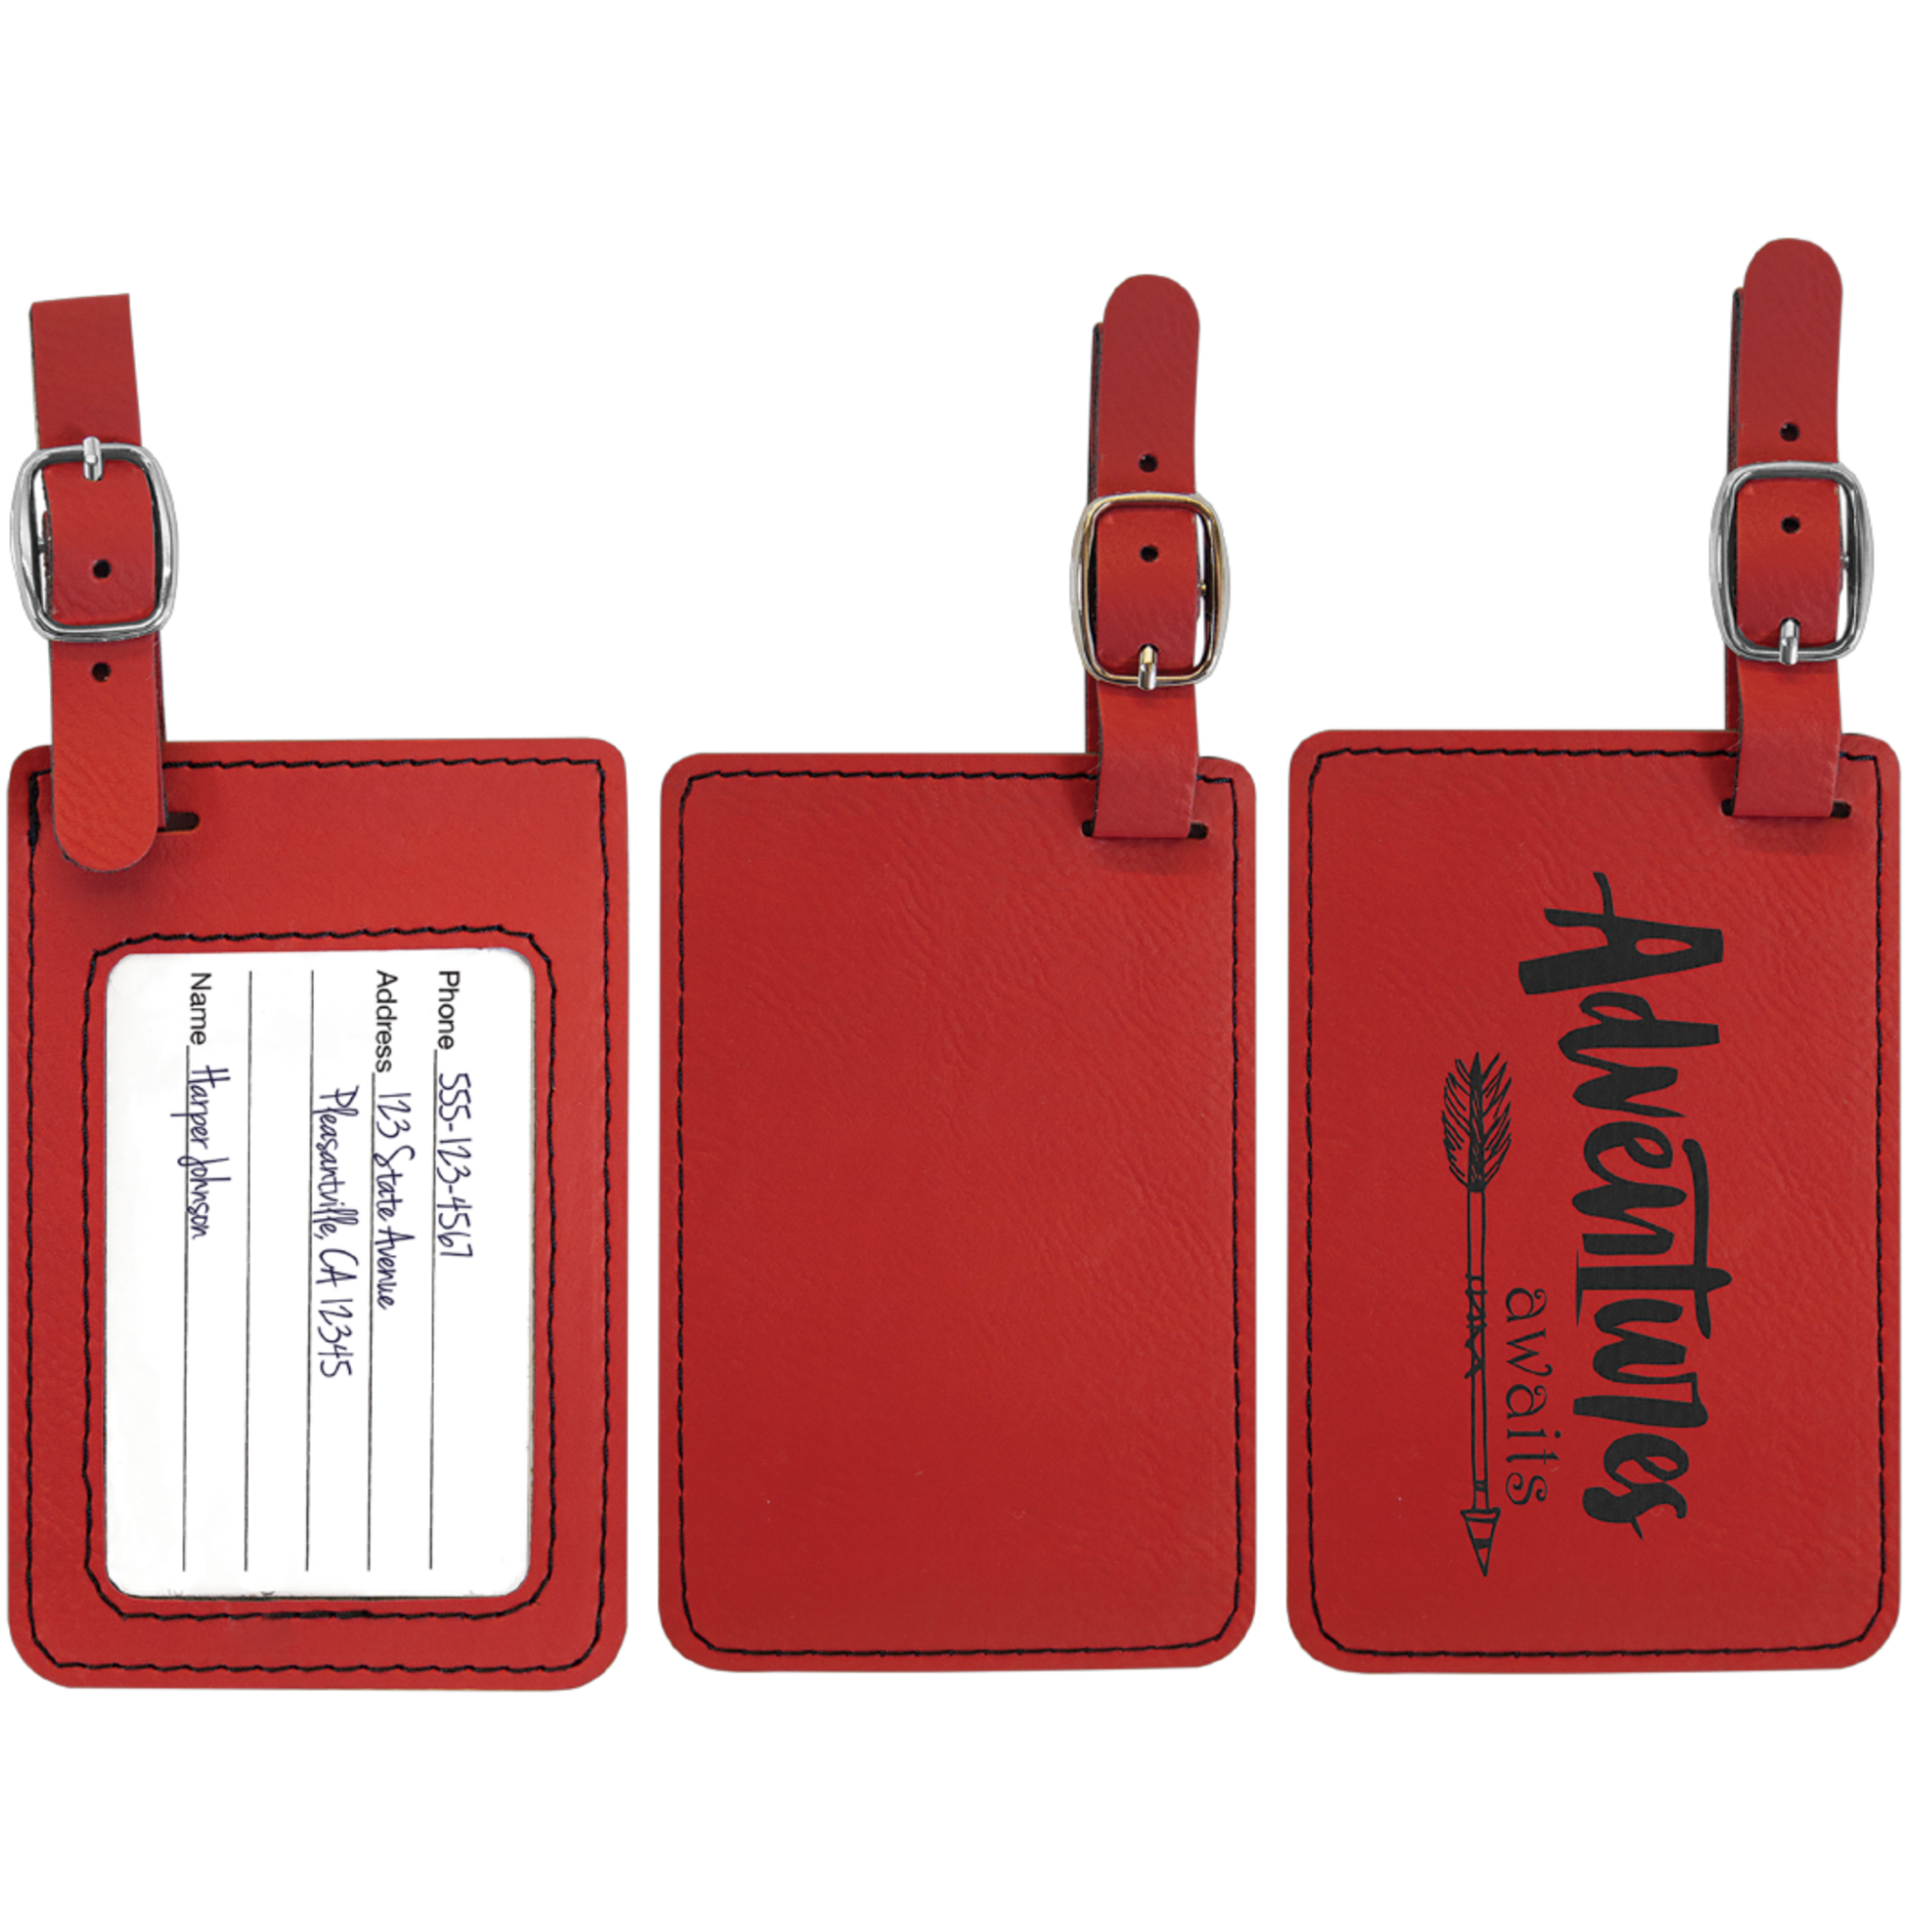 Custom & Personalized Luggage Tags